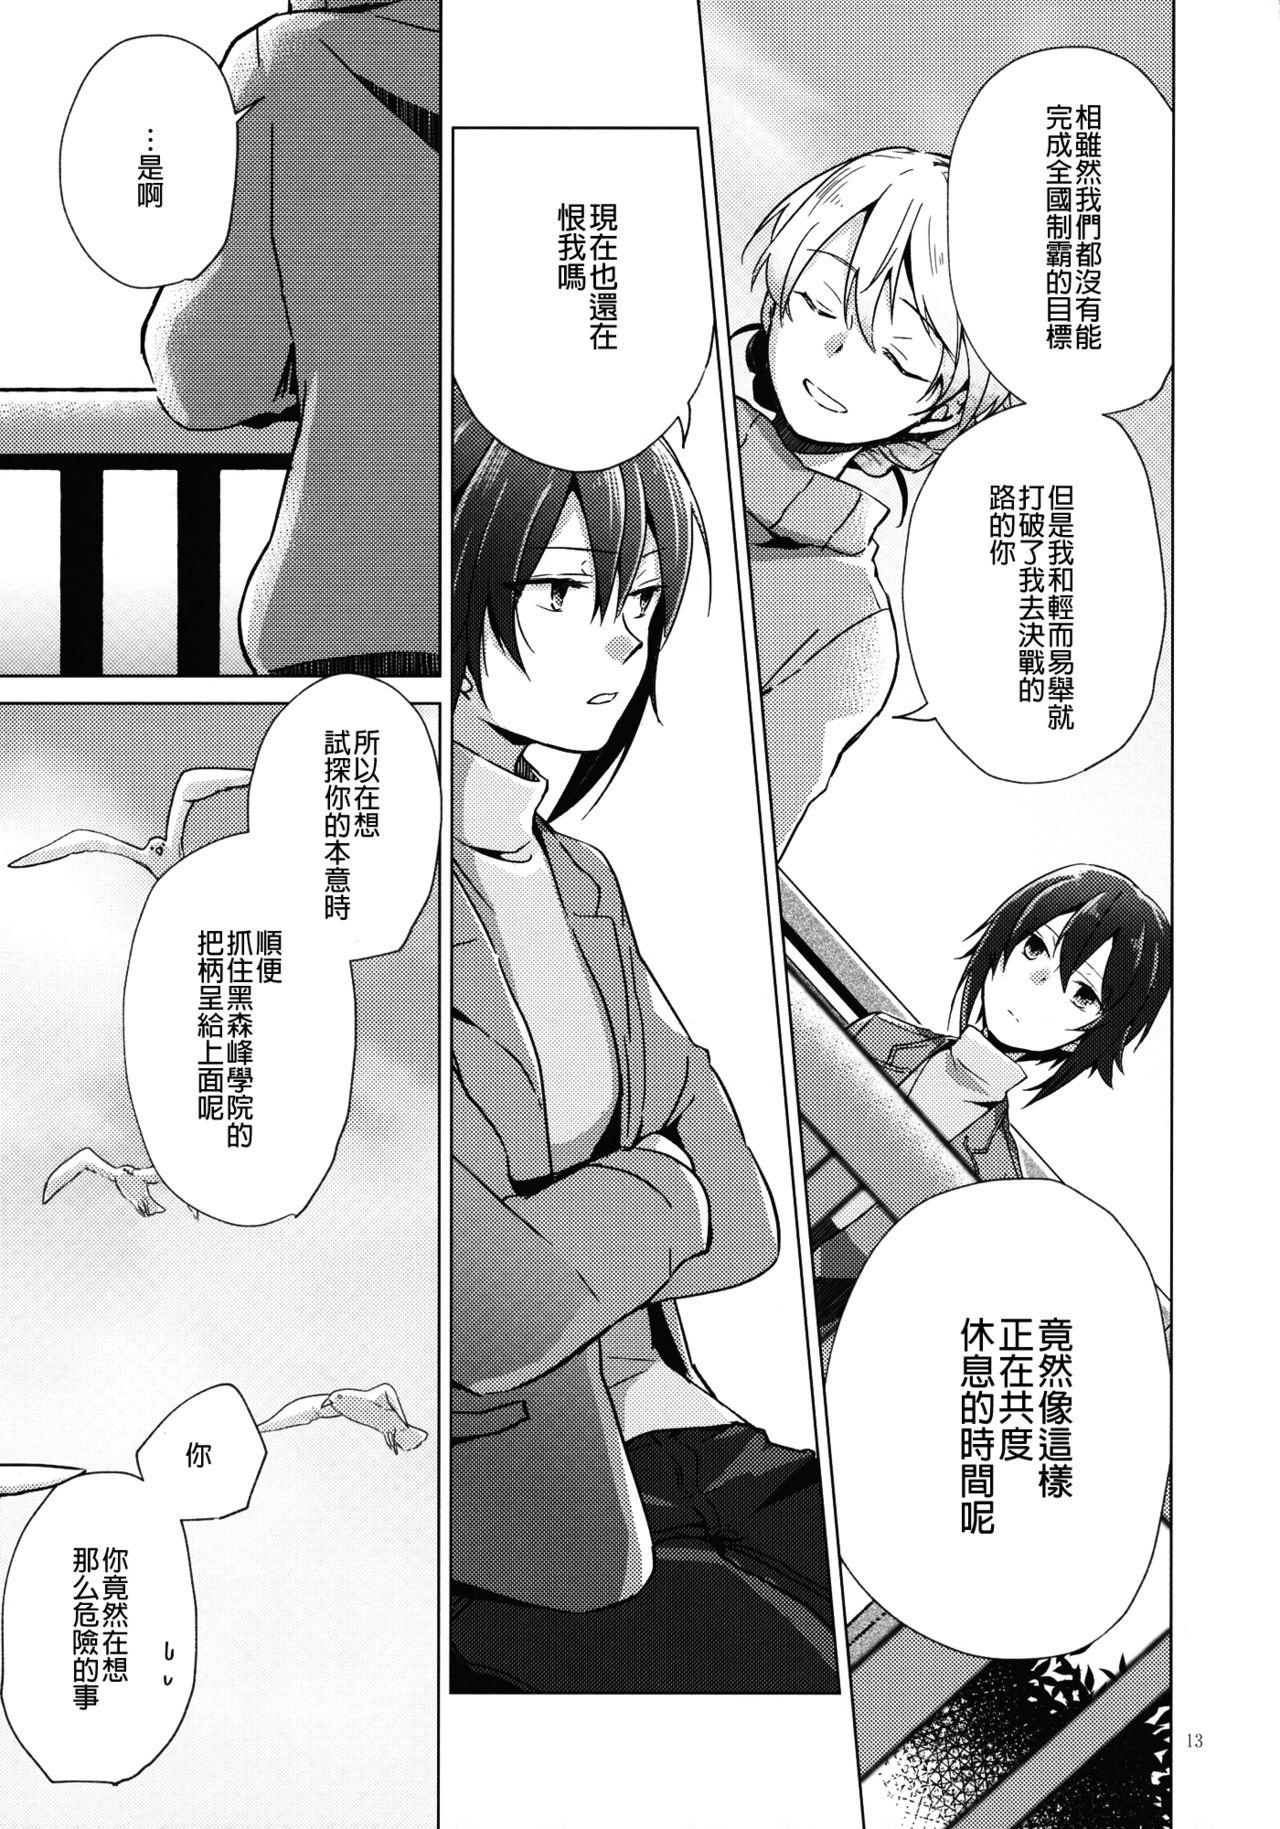 Good Over Time | 超時 - Girls und panzer Amature Sex - Page 13